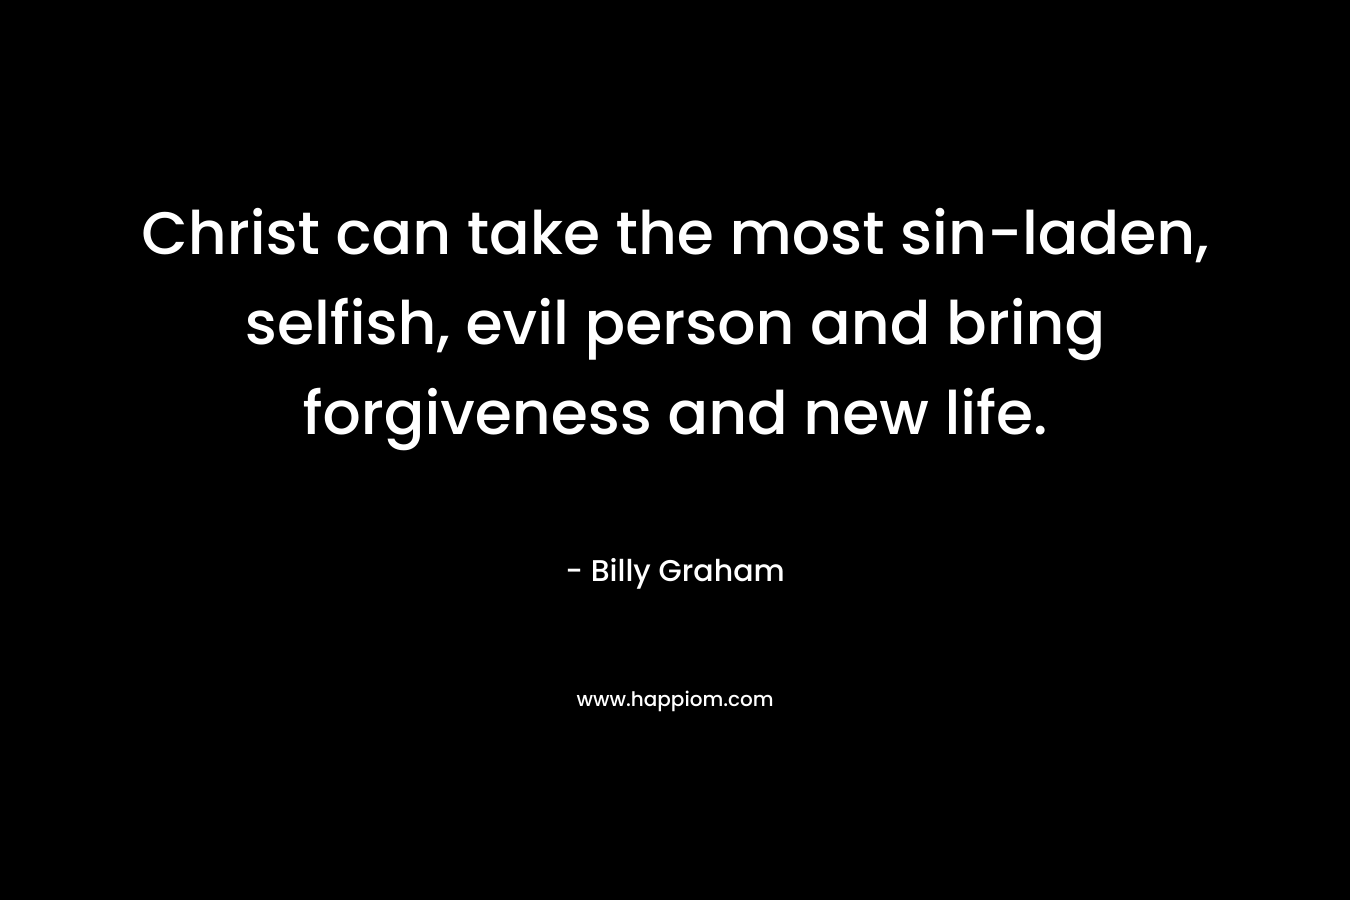 Christ can take the most sin-laden, selfish, evil person and bring forgiveness and new life.